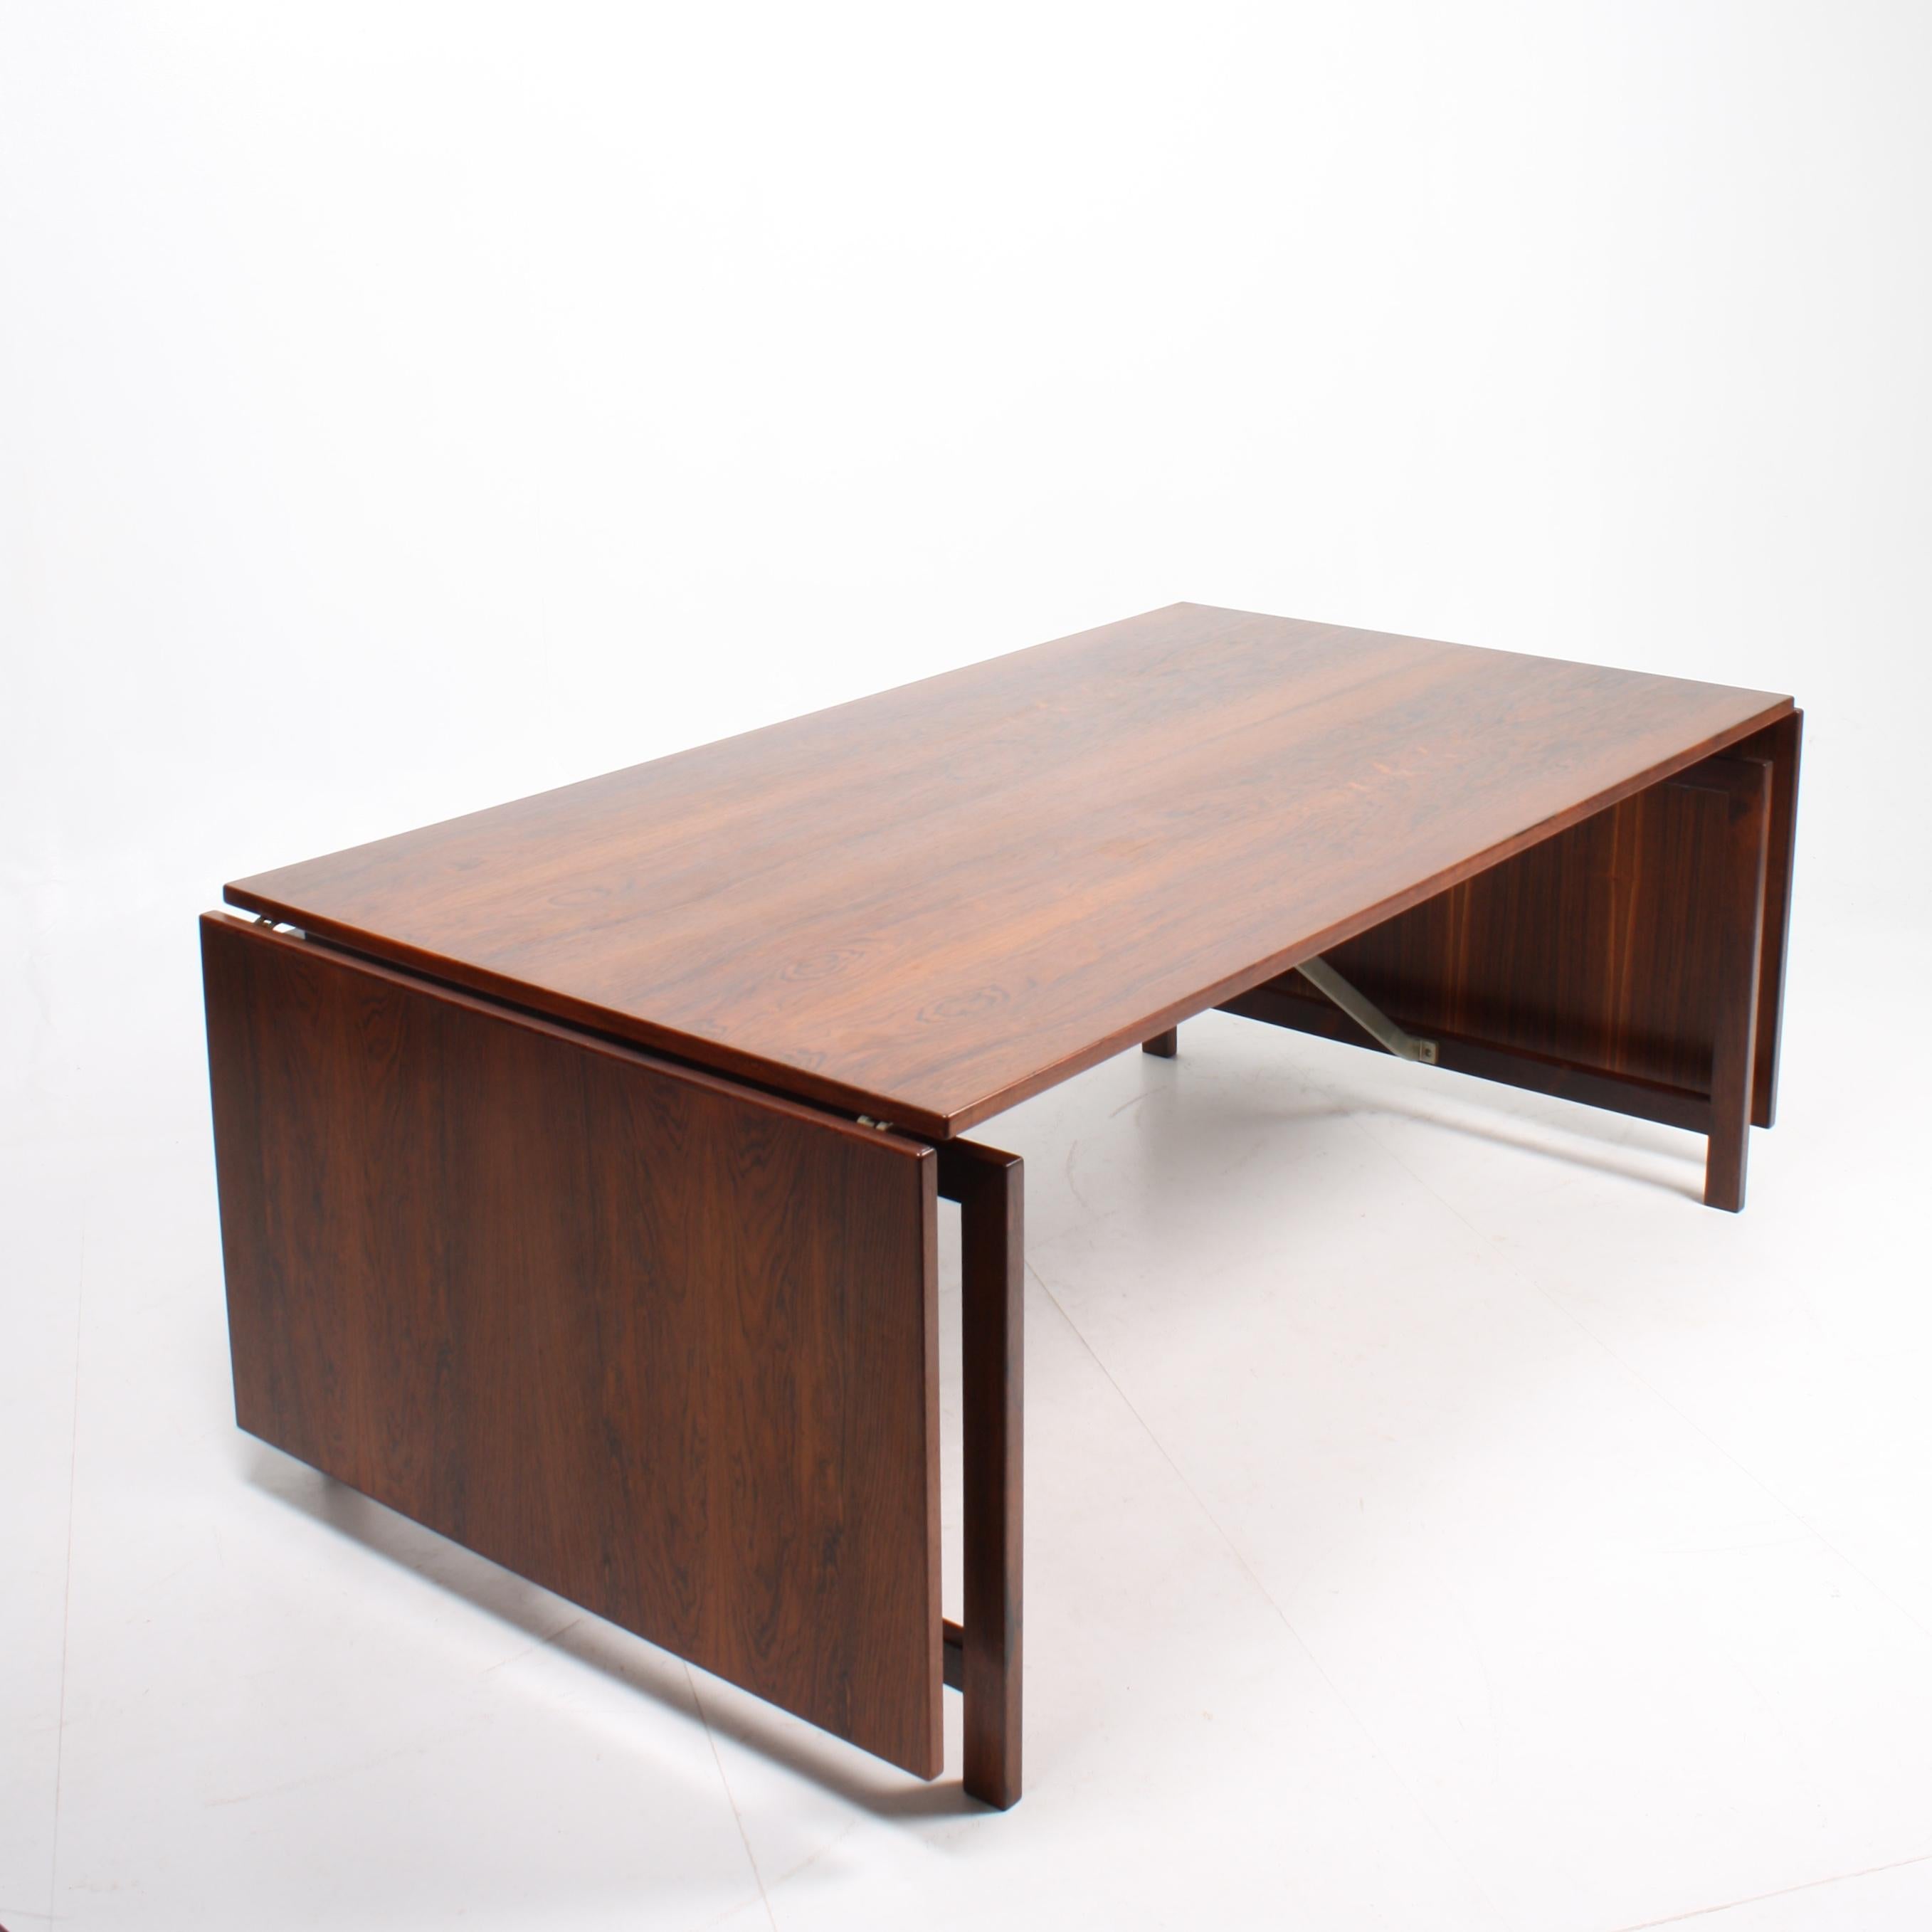 Large drop-leaf table in rosewood with a chromed rail designed by Hans Wegner for Tuck Cabinetmakers. Outstanding quality. Original condition. 180 / 300 cm wide when open.